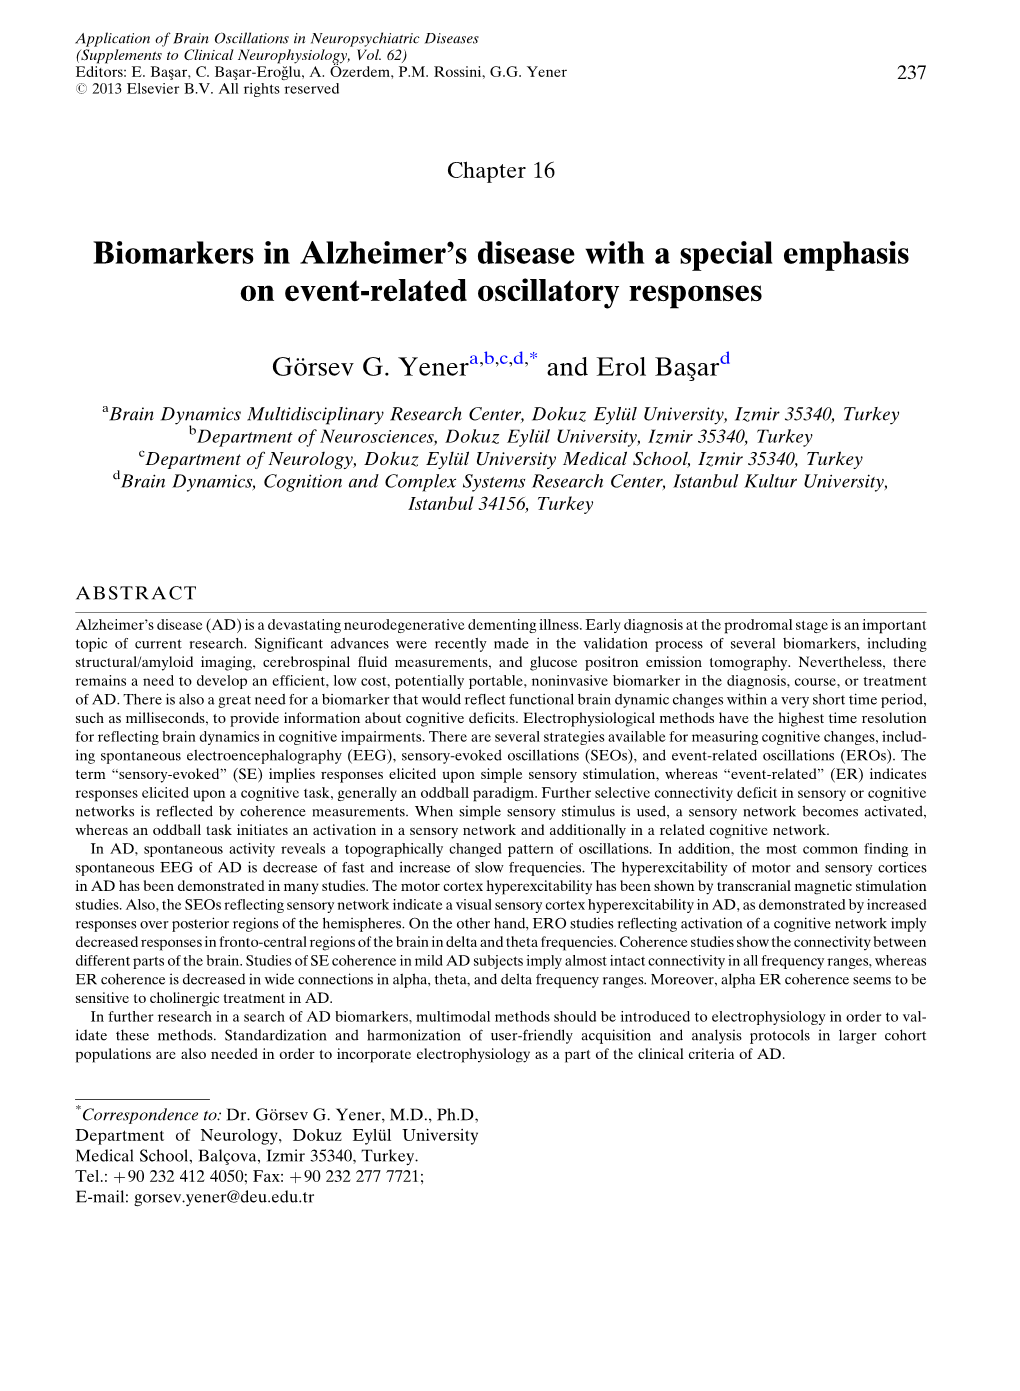 Biomarkers in Alzheimer's Disease with a Special Emphasis on Event